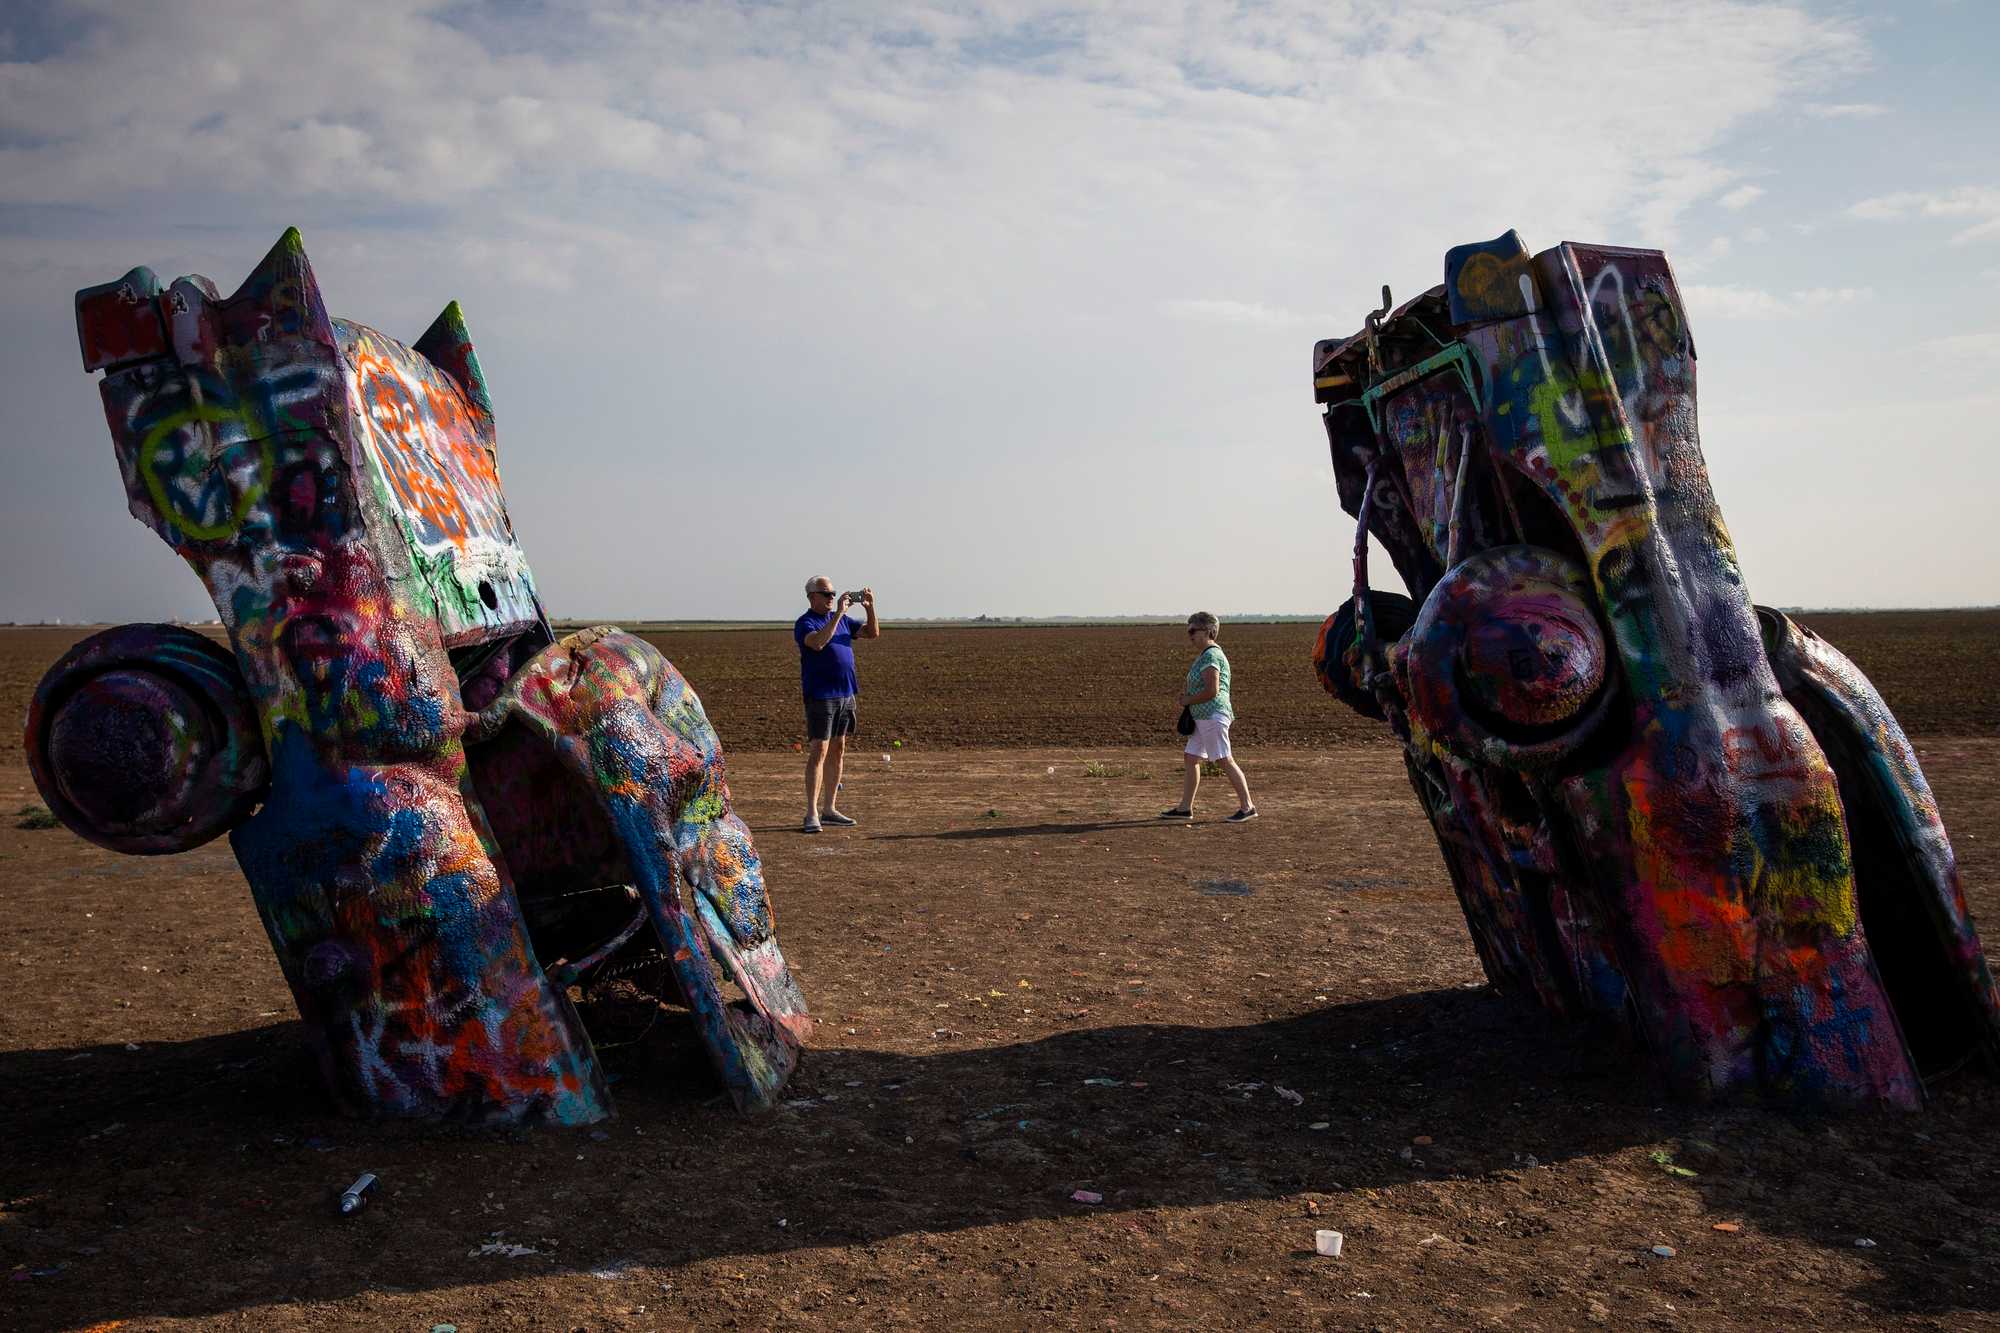 A millionaire brought a group of San Francisco artists to Amarillo to create the Cadillac Ranch installation in 1974.